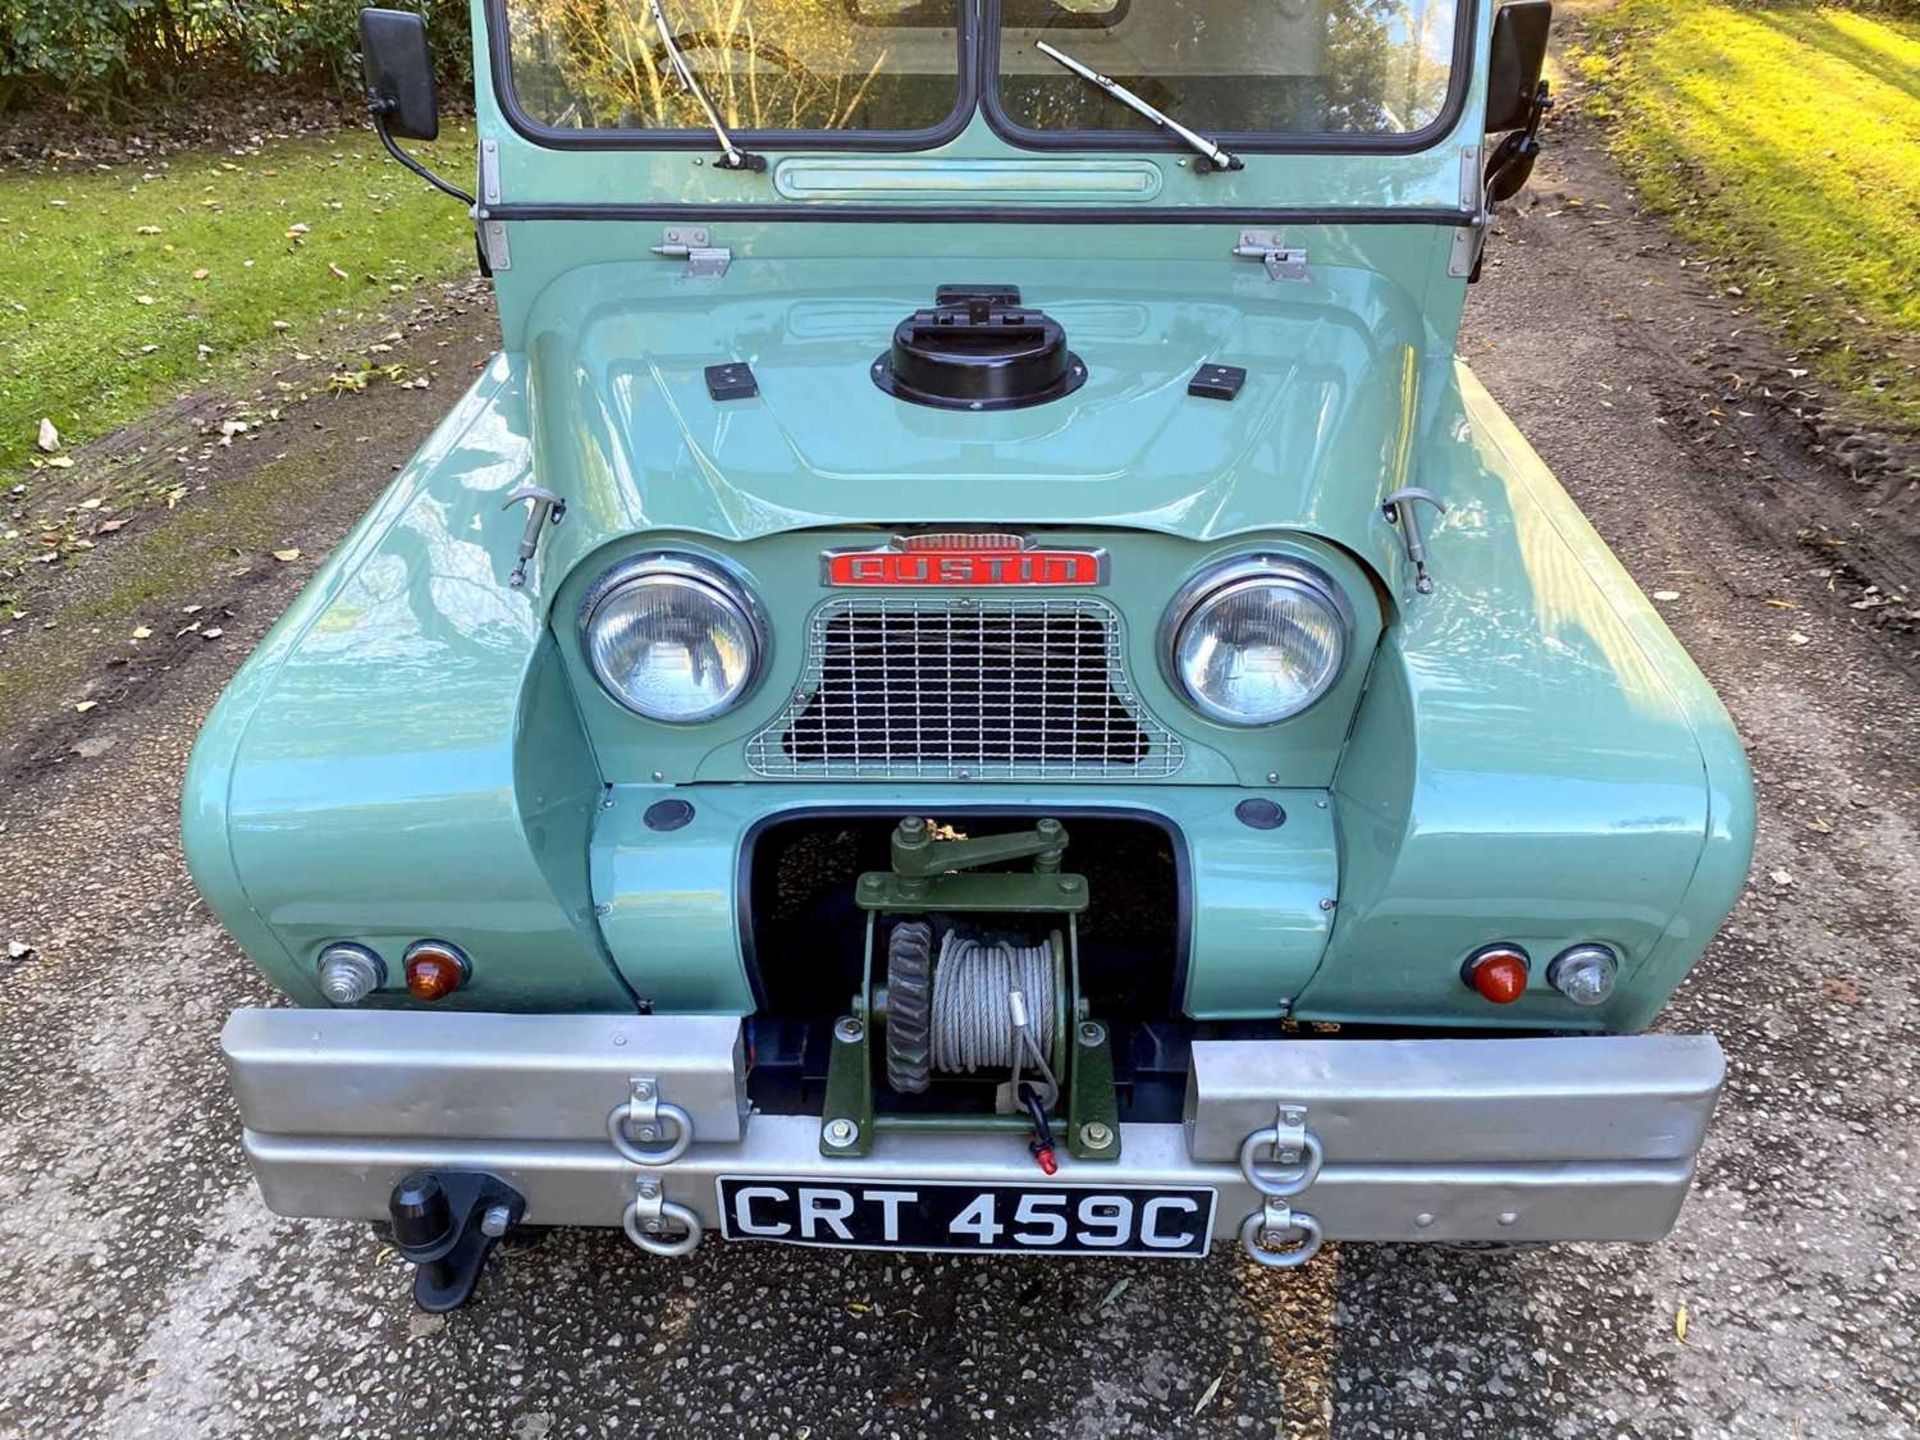 1965 Austin Gipsy SWB Restored to a high standard throughout - Image 65 of 87